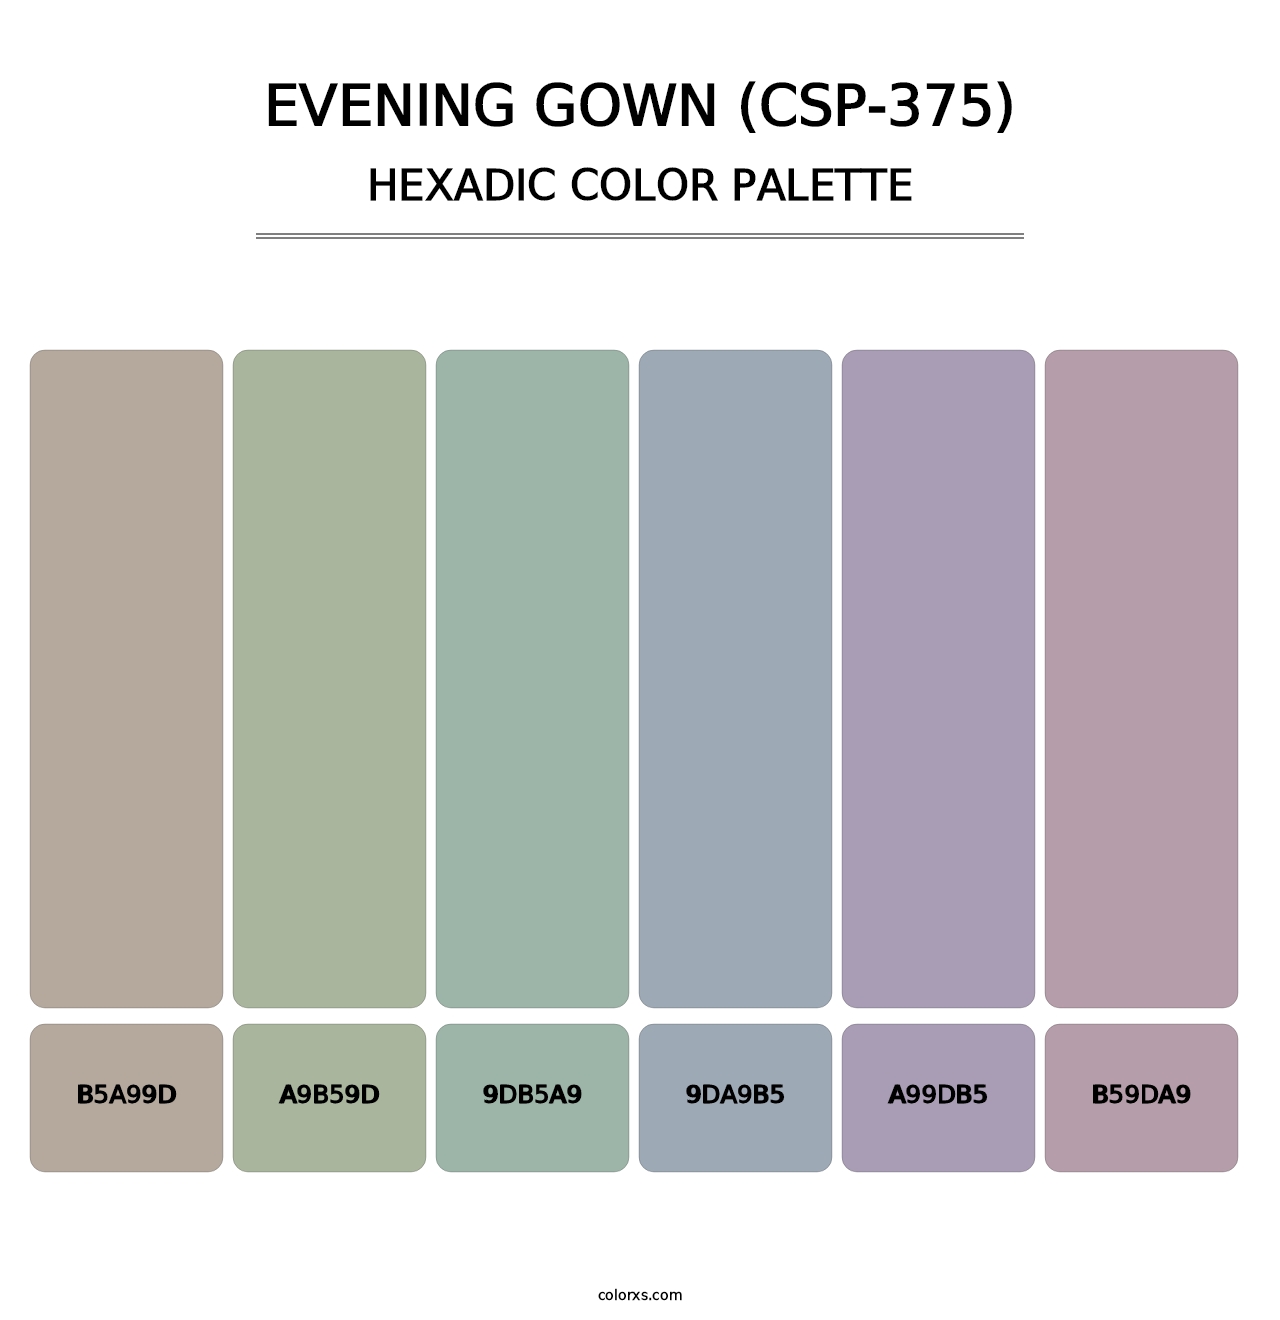 Evening Gown (CSP-375) - Hexadic Color Palette